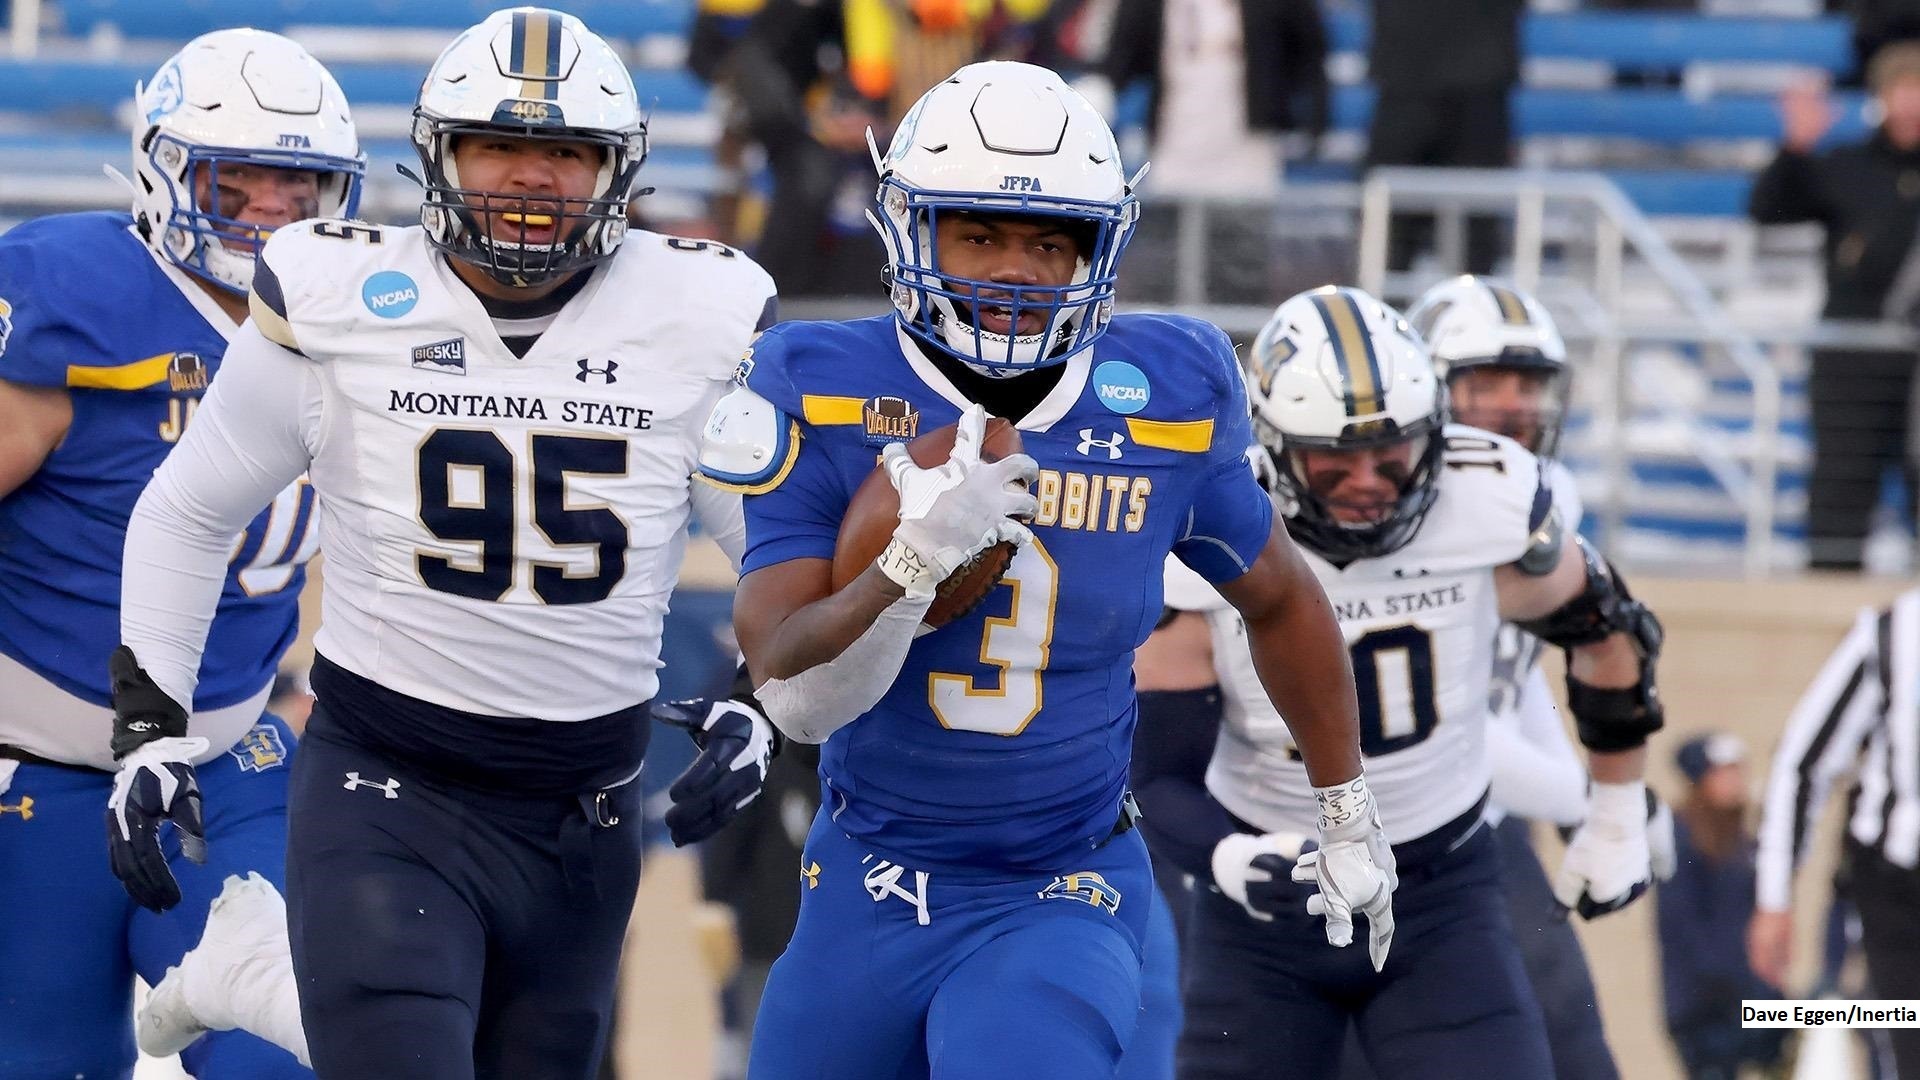 FCS Football Week 2 Preview and Predictions: Montana State, SDSU in Another Showdown